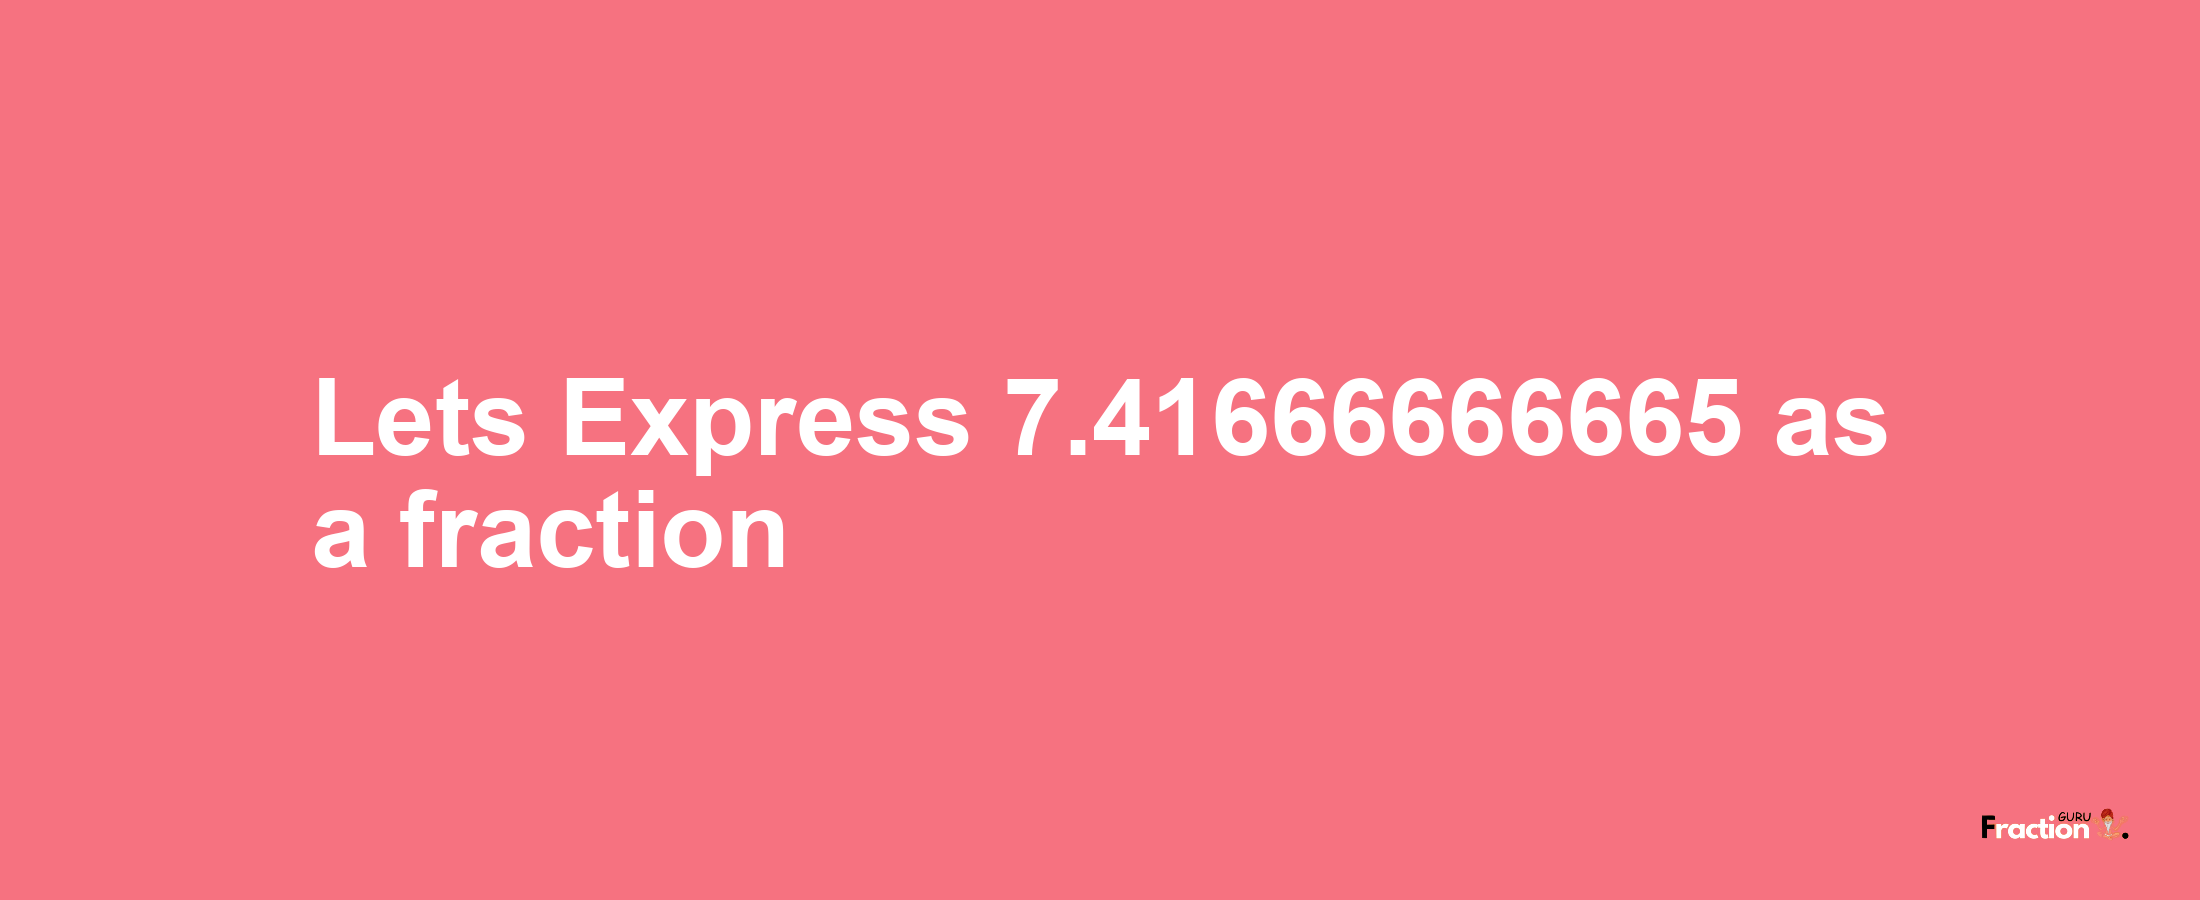 Lets Express 7.41666666665 as afraction